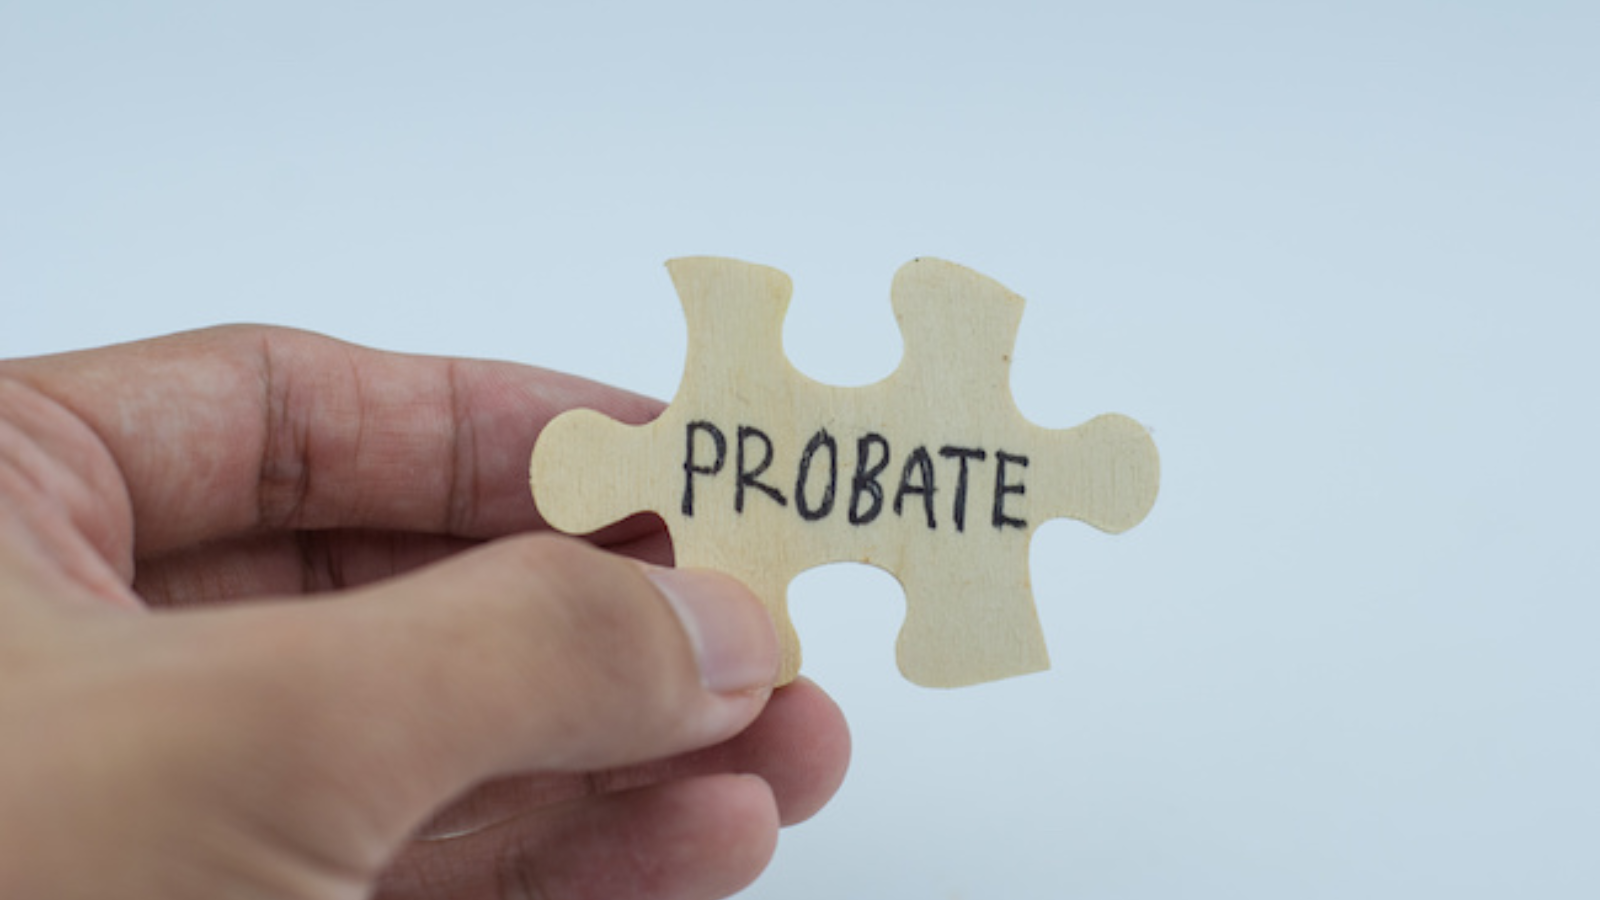 The Probate Process - what you should know